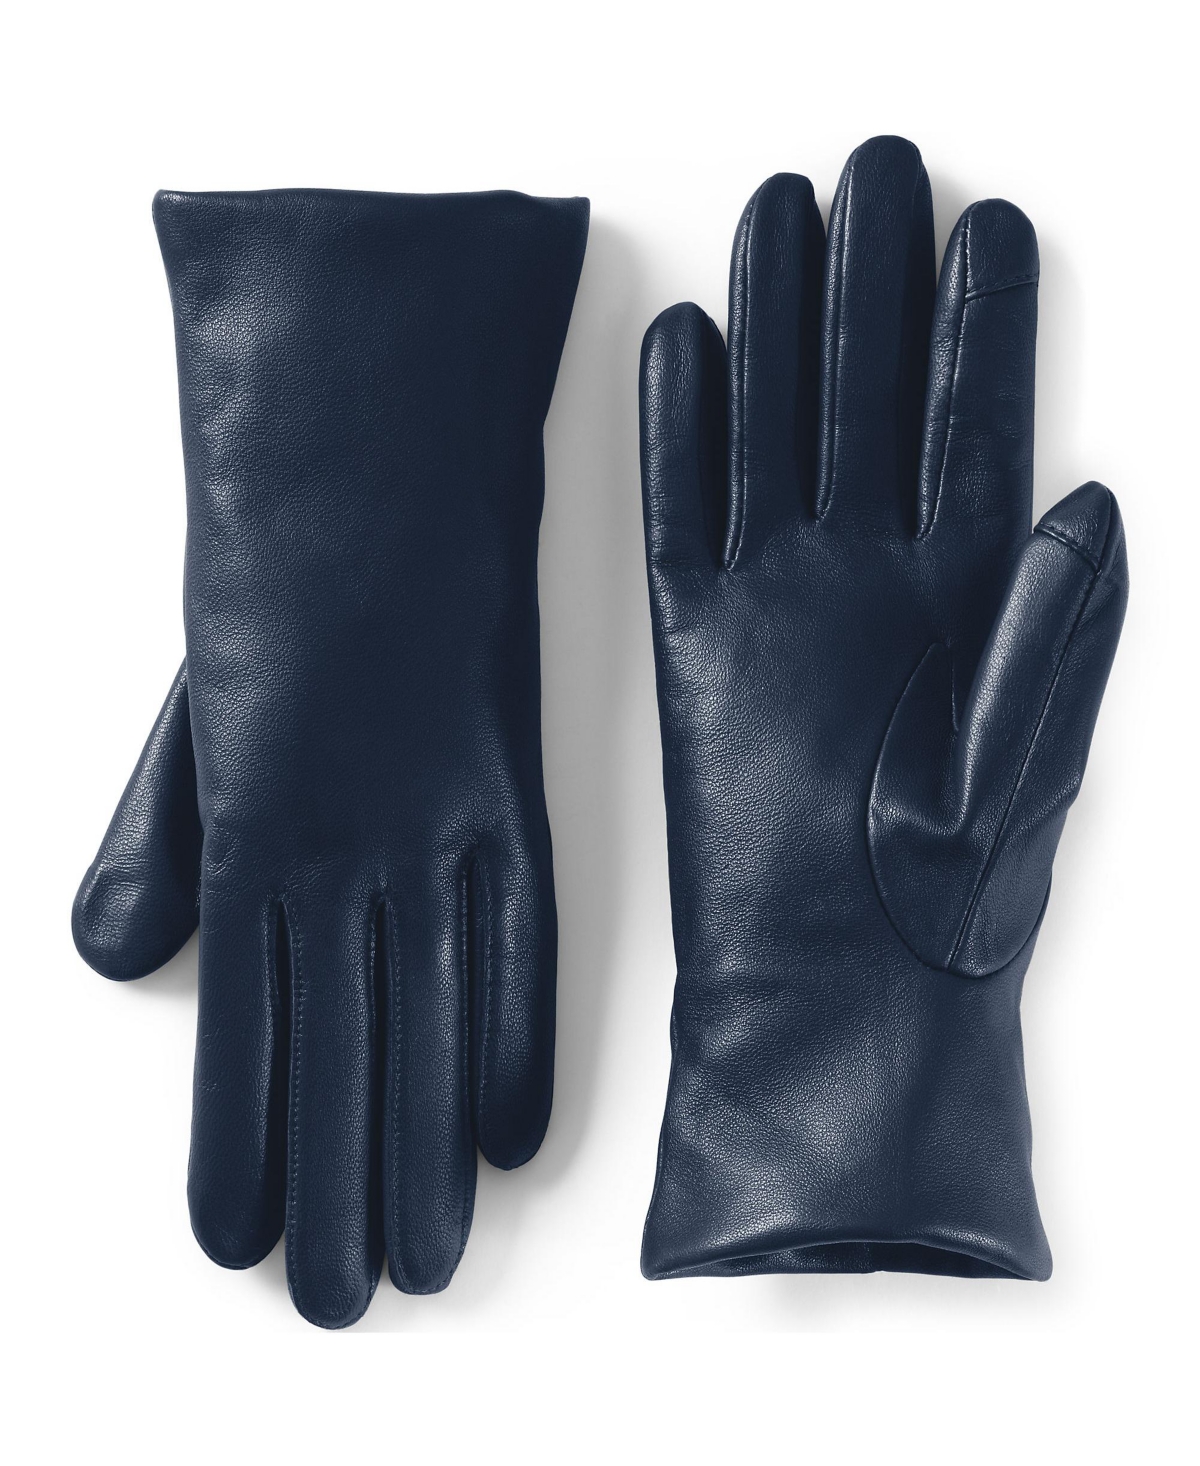 Women's Ez Touch Screen Cashmere Lined Leather Gloves - Radiant navy